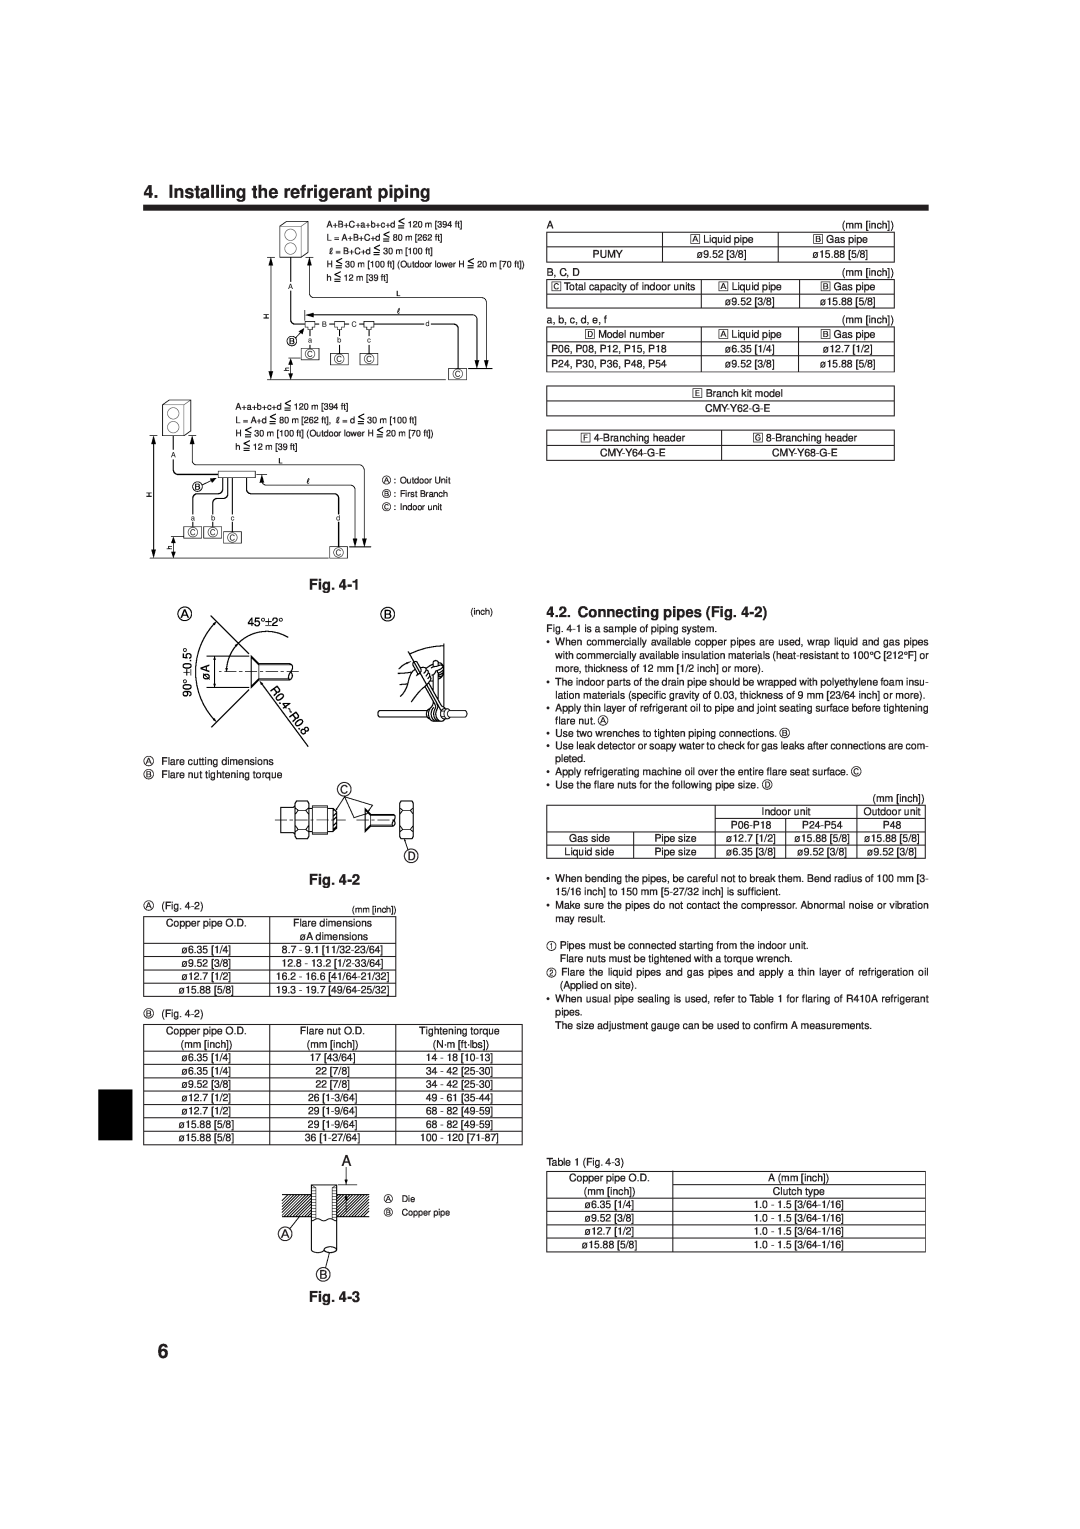 Mitsubishi Electronics R410A installation manual Connecting pipes Fig, Installing the refrigerant piping 